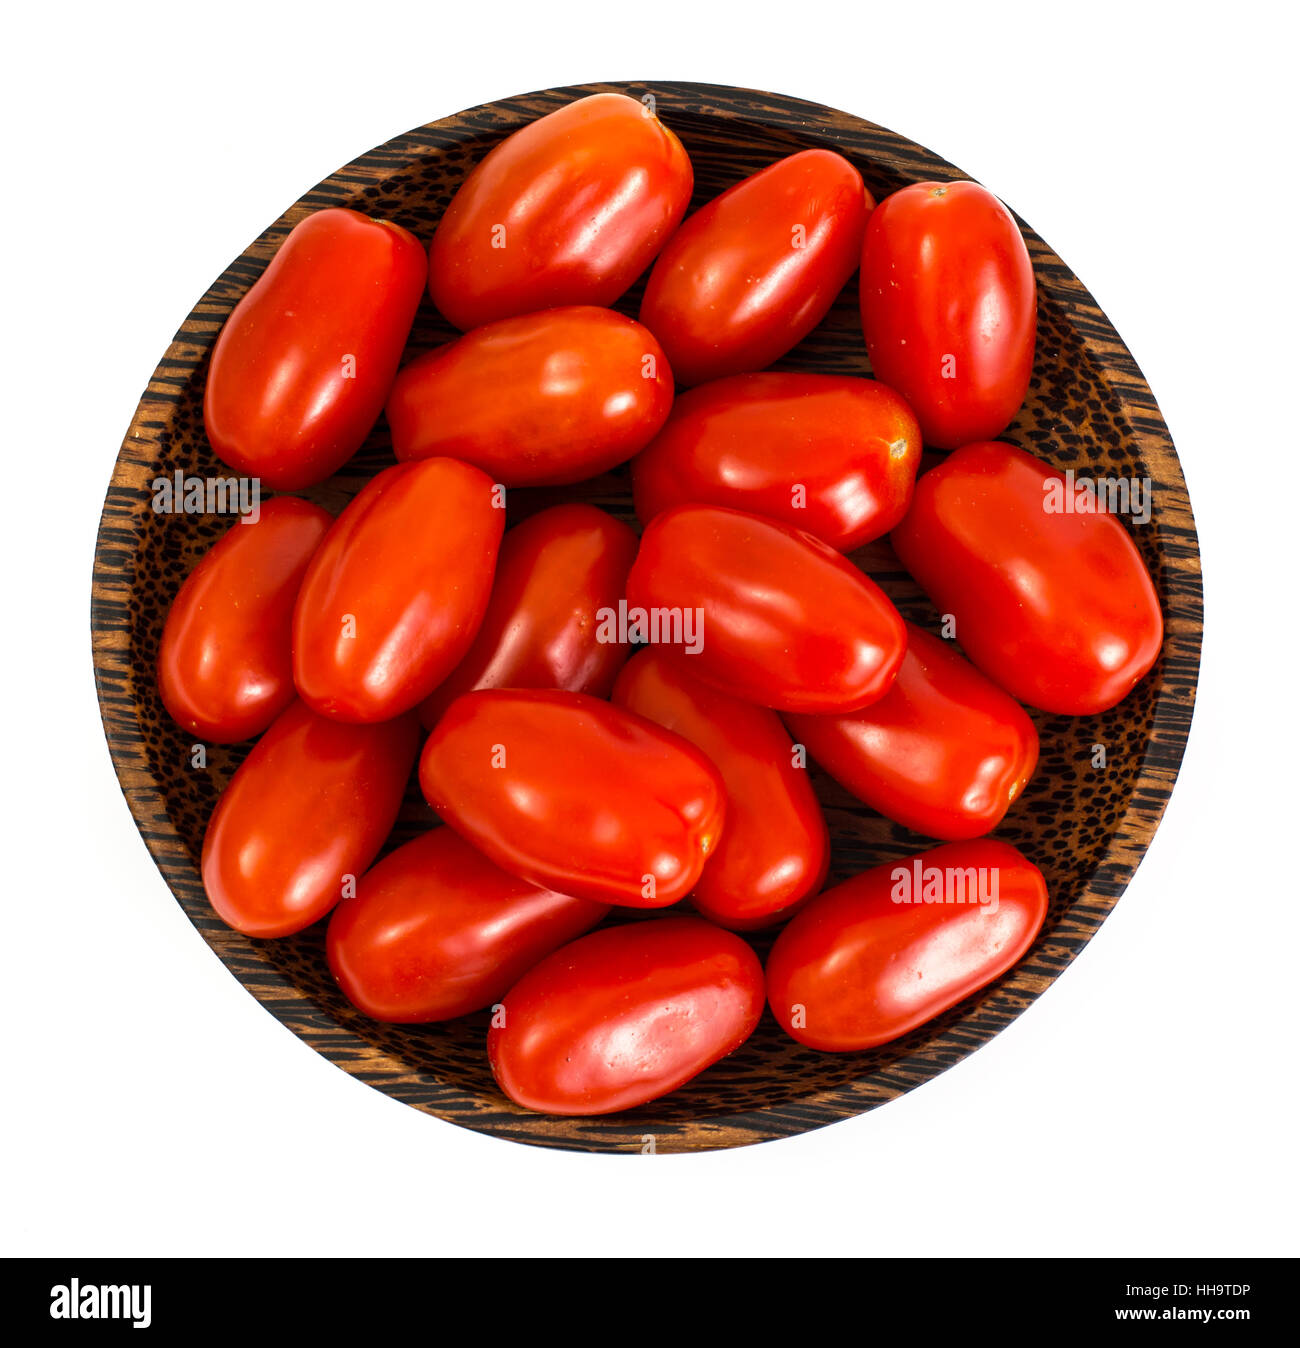 Small red oblong tomatoes Stock Photo